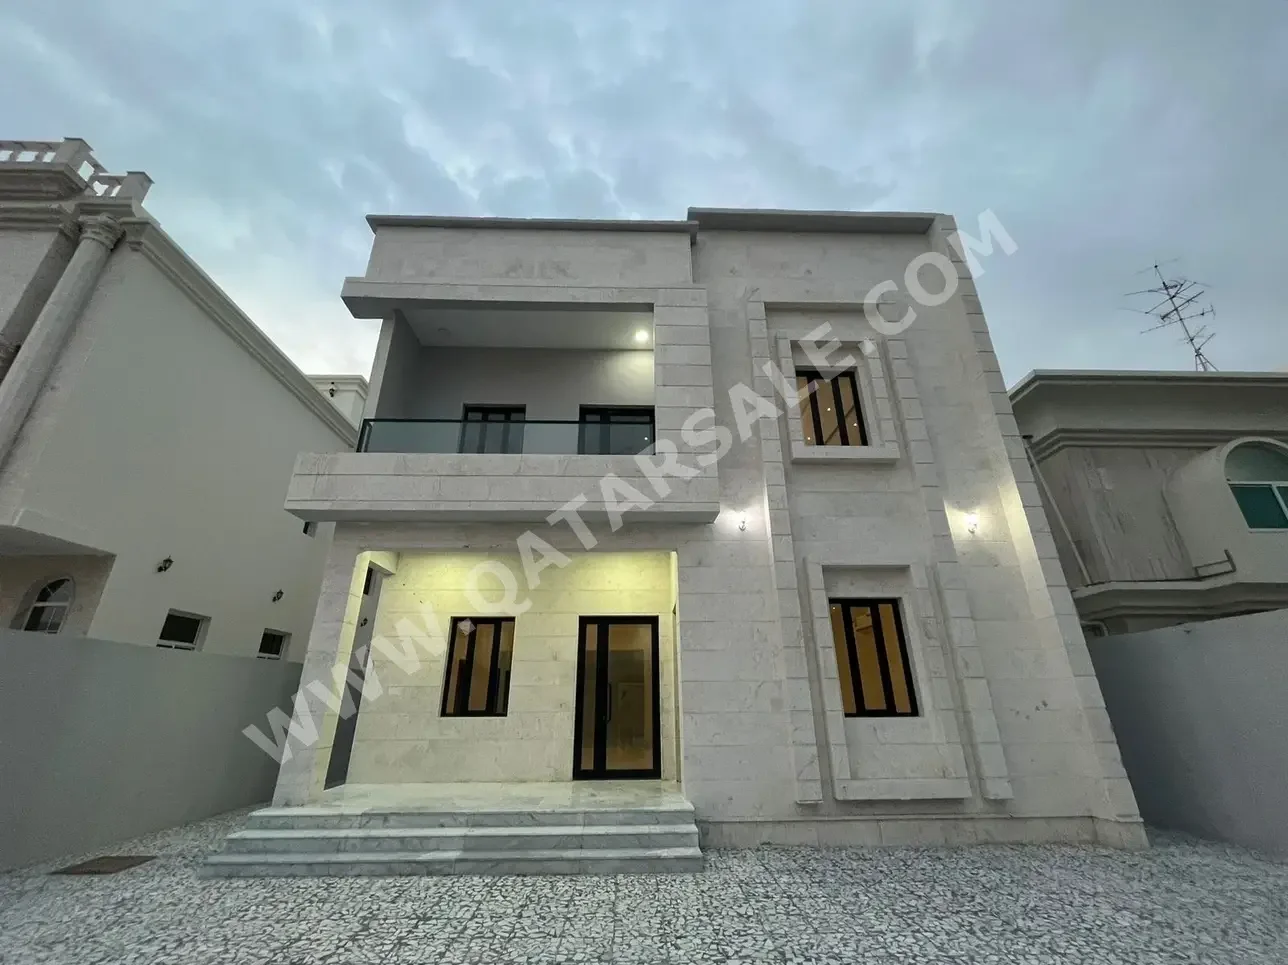 Family Residential  Not Furnished  Doha  Nuaija  7 Bedrooms  Includes Water & Electricity